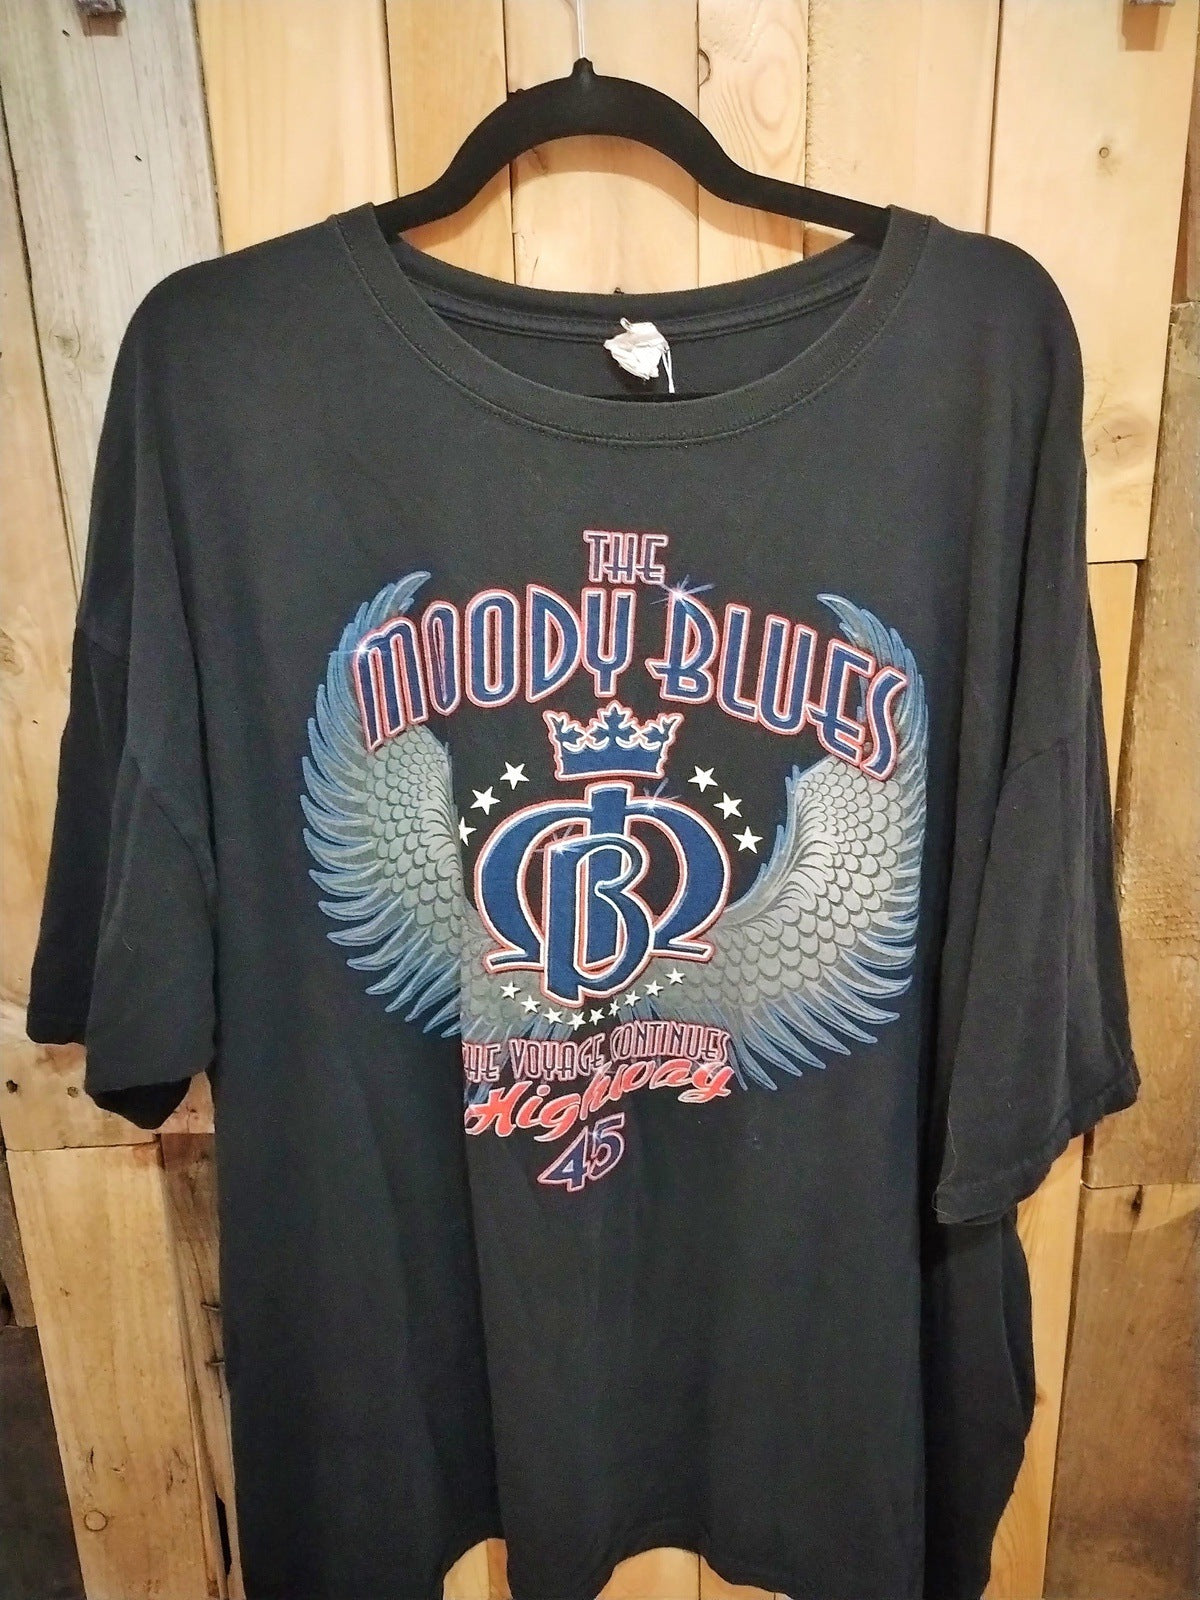 The Moody Blues "The Voyage Continues Highway 45" T Shirt Size 3X 274152WH